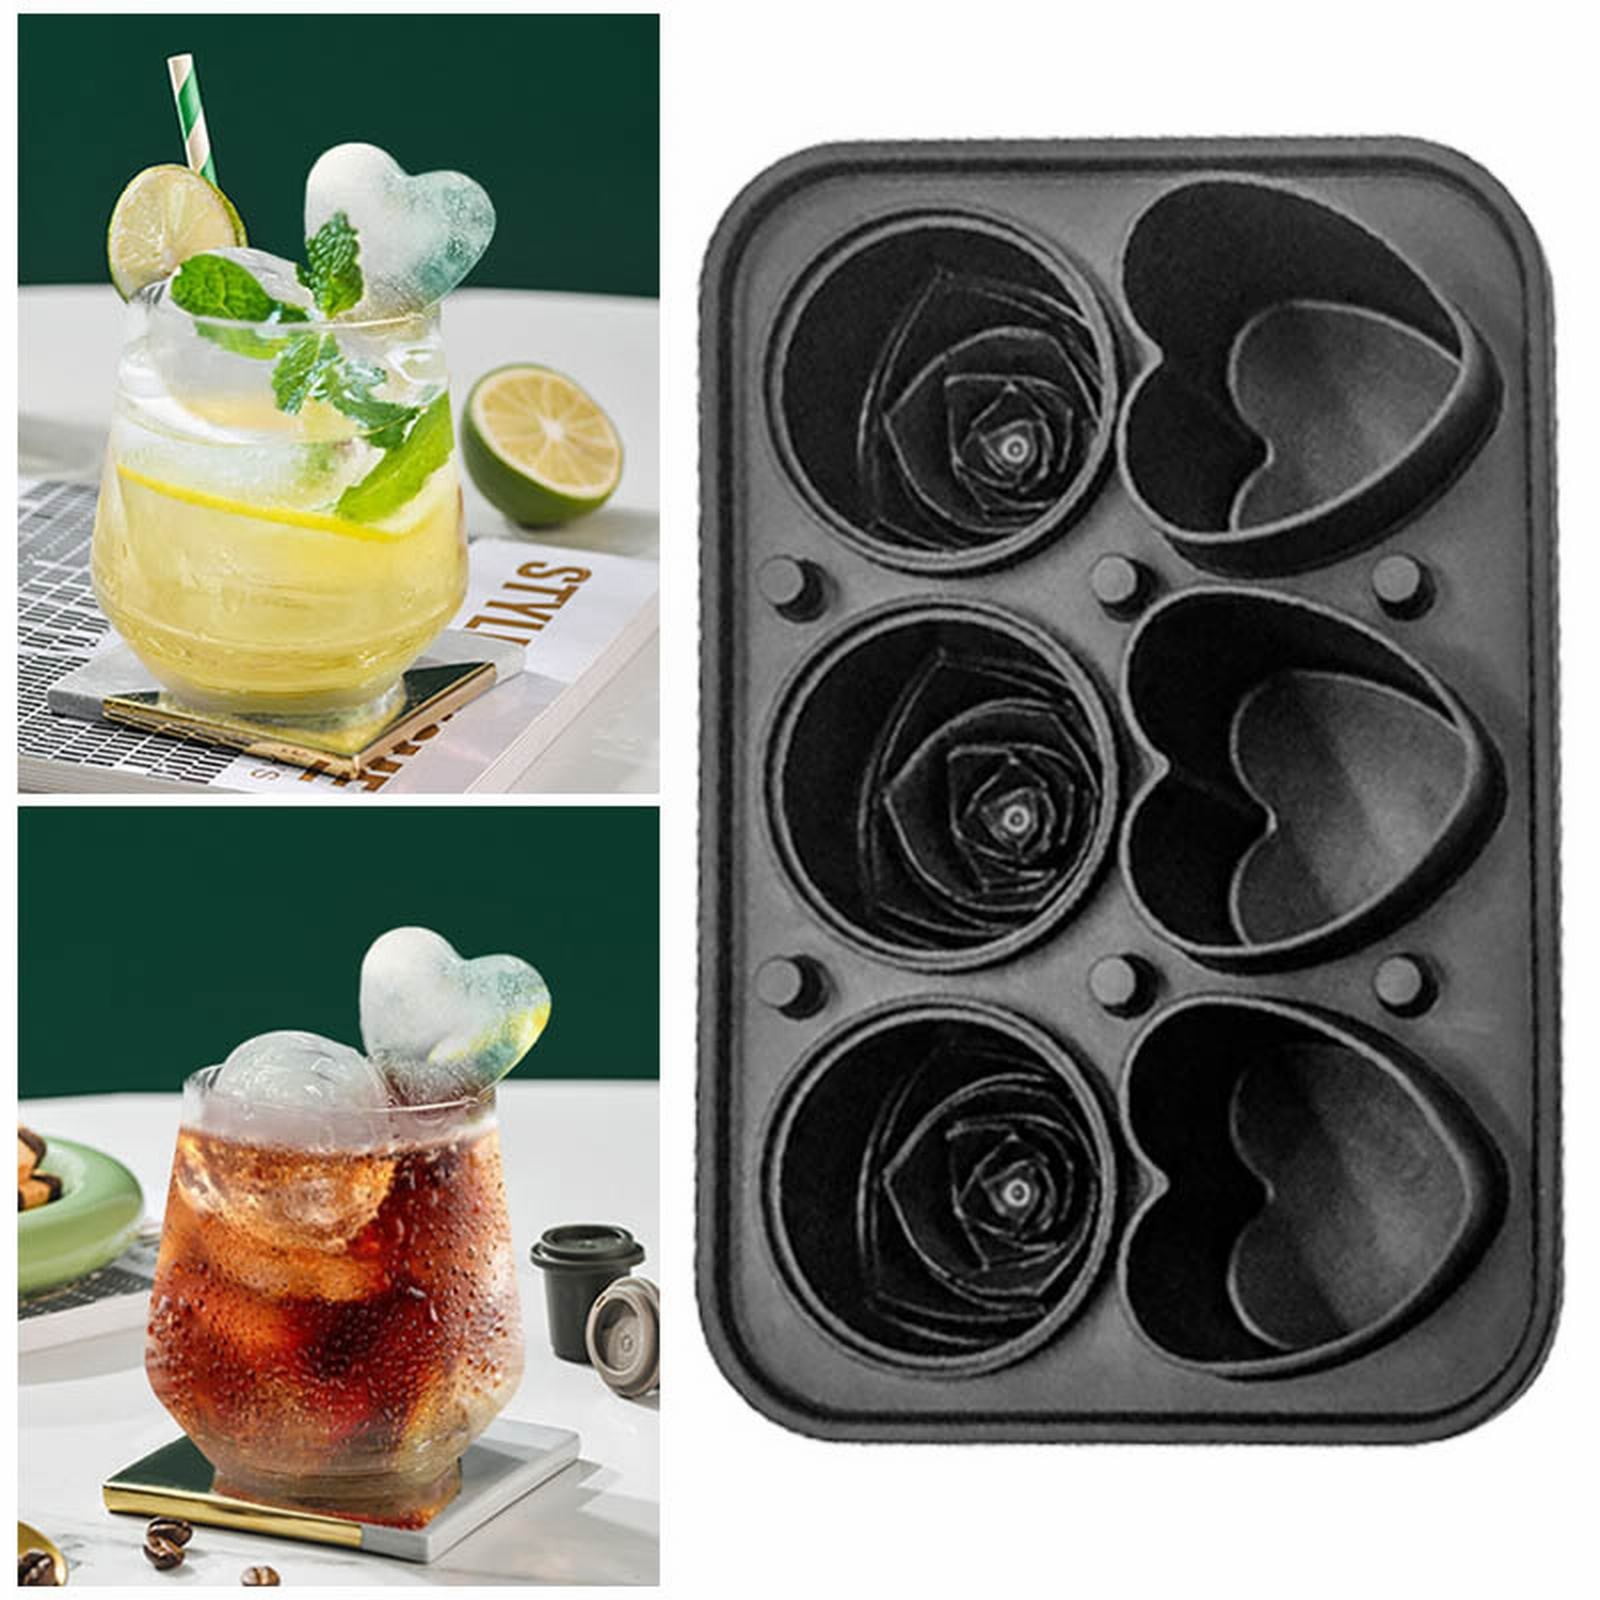 Rose Ice Cube Mold, Heart Shapes Ice Cube Tray, Silicone Ice Mold Fun  Shapes with Clear Funnel-type Lid, 3 Heart & 3 Rose Ice Balls for Chilling  Whiskey Cocktails Drinks, Pink 